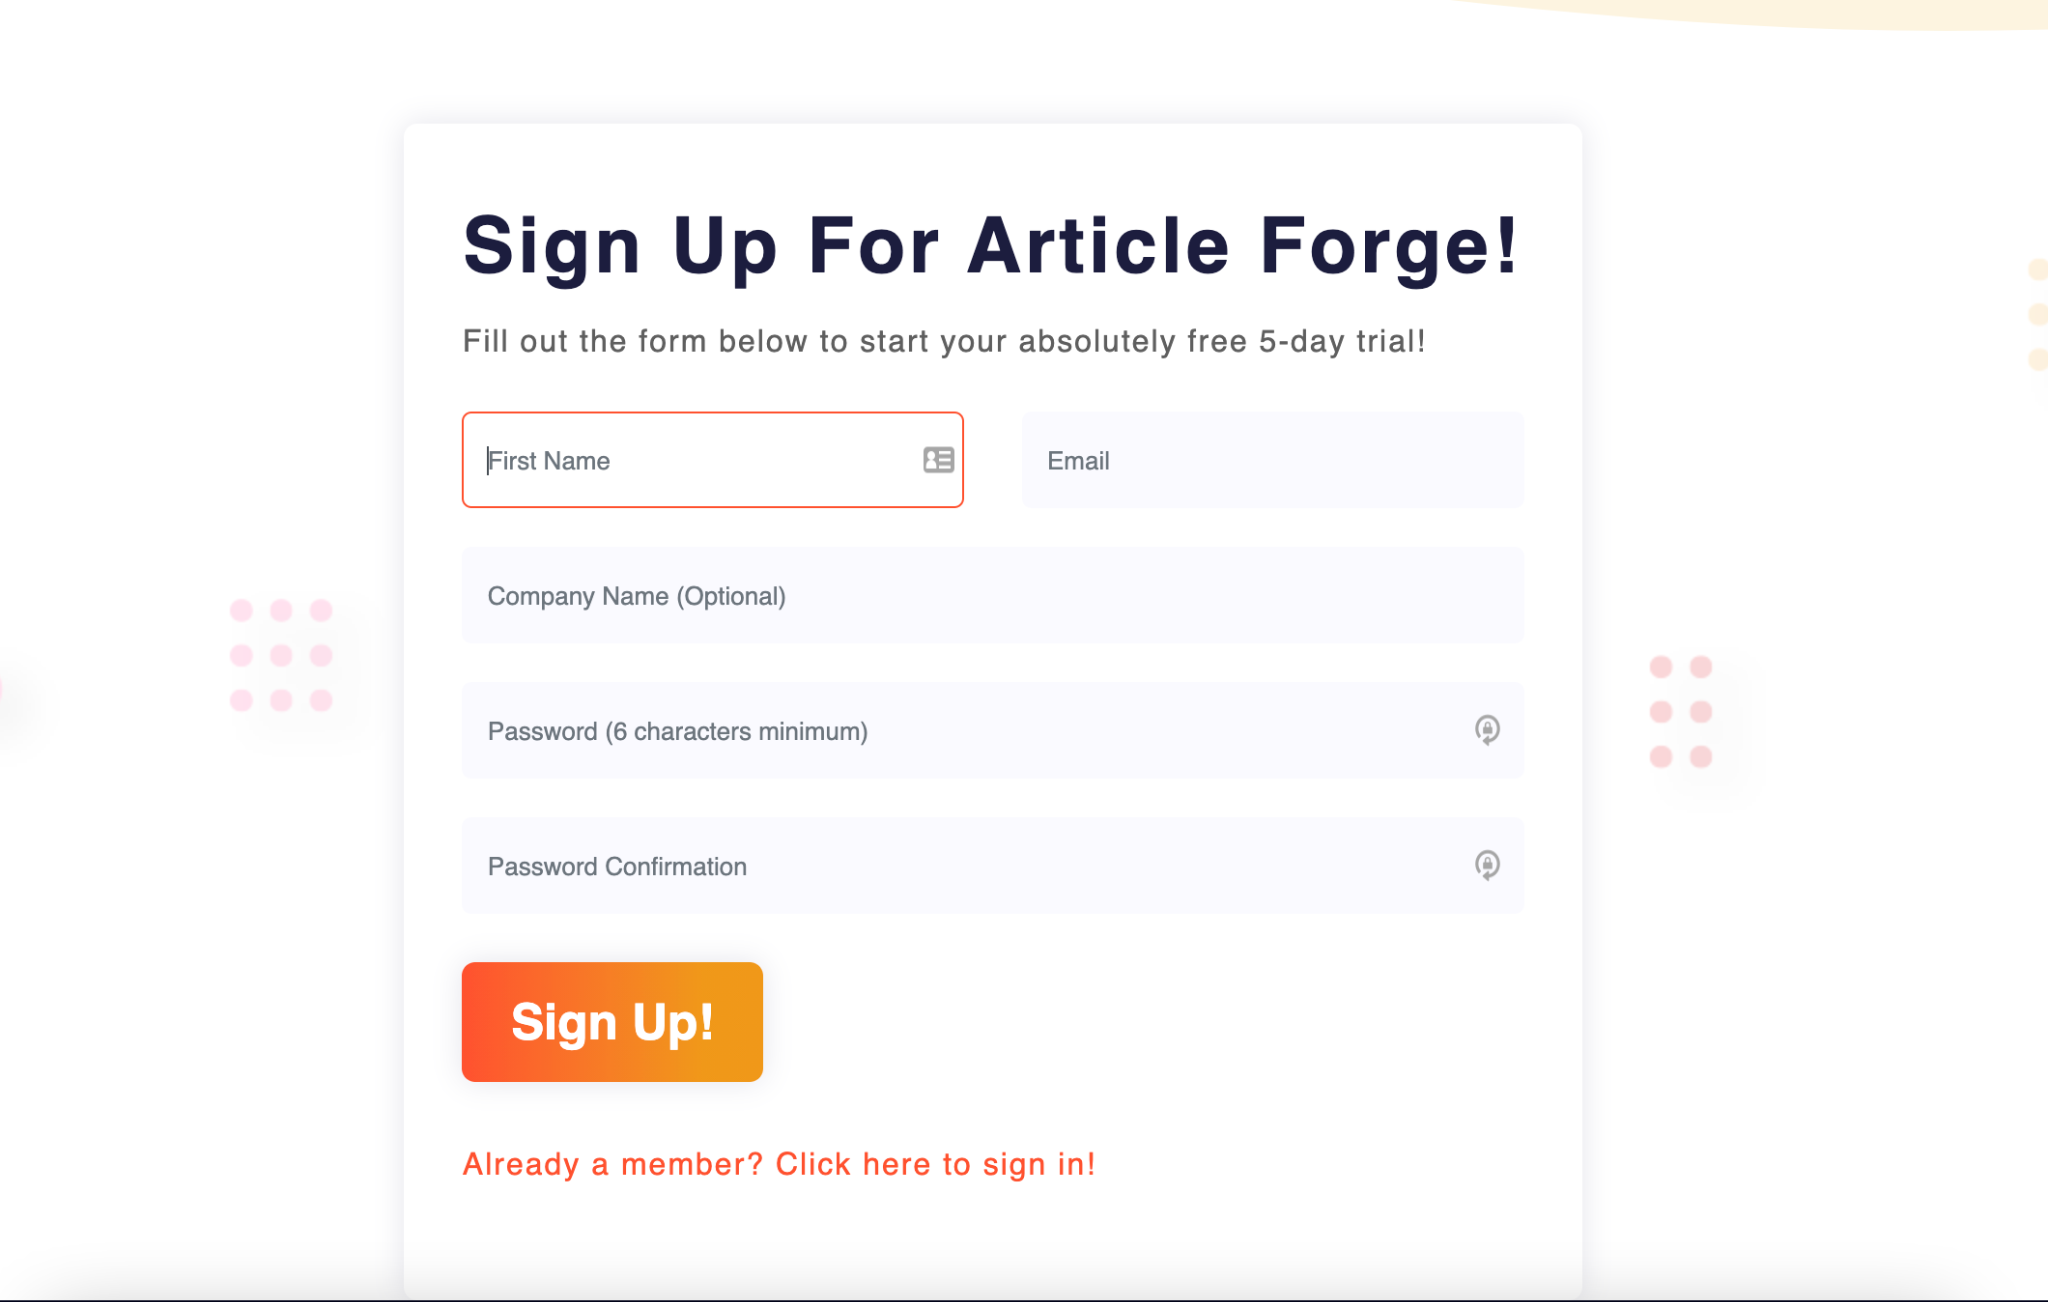 Sign up for Article Forge